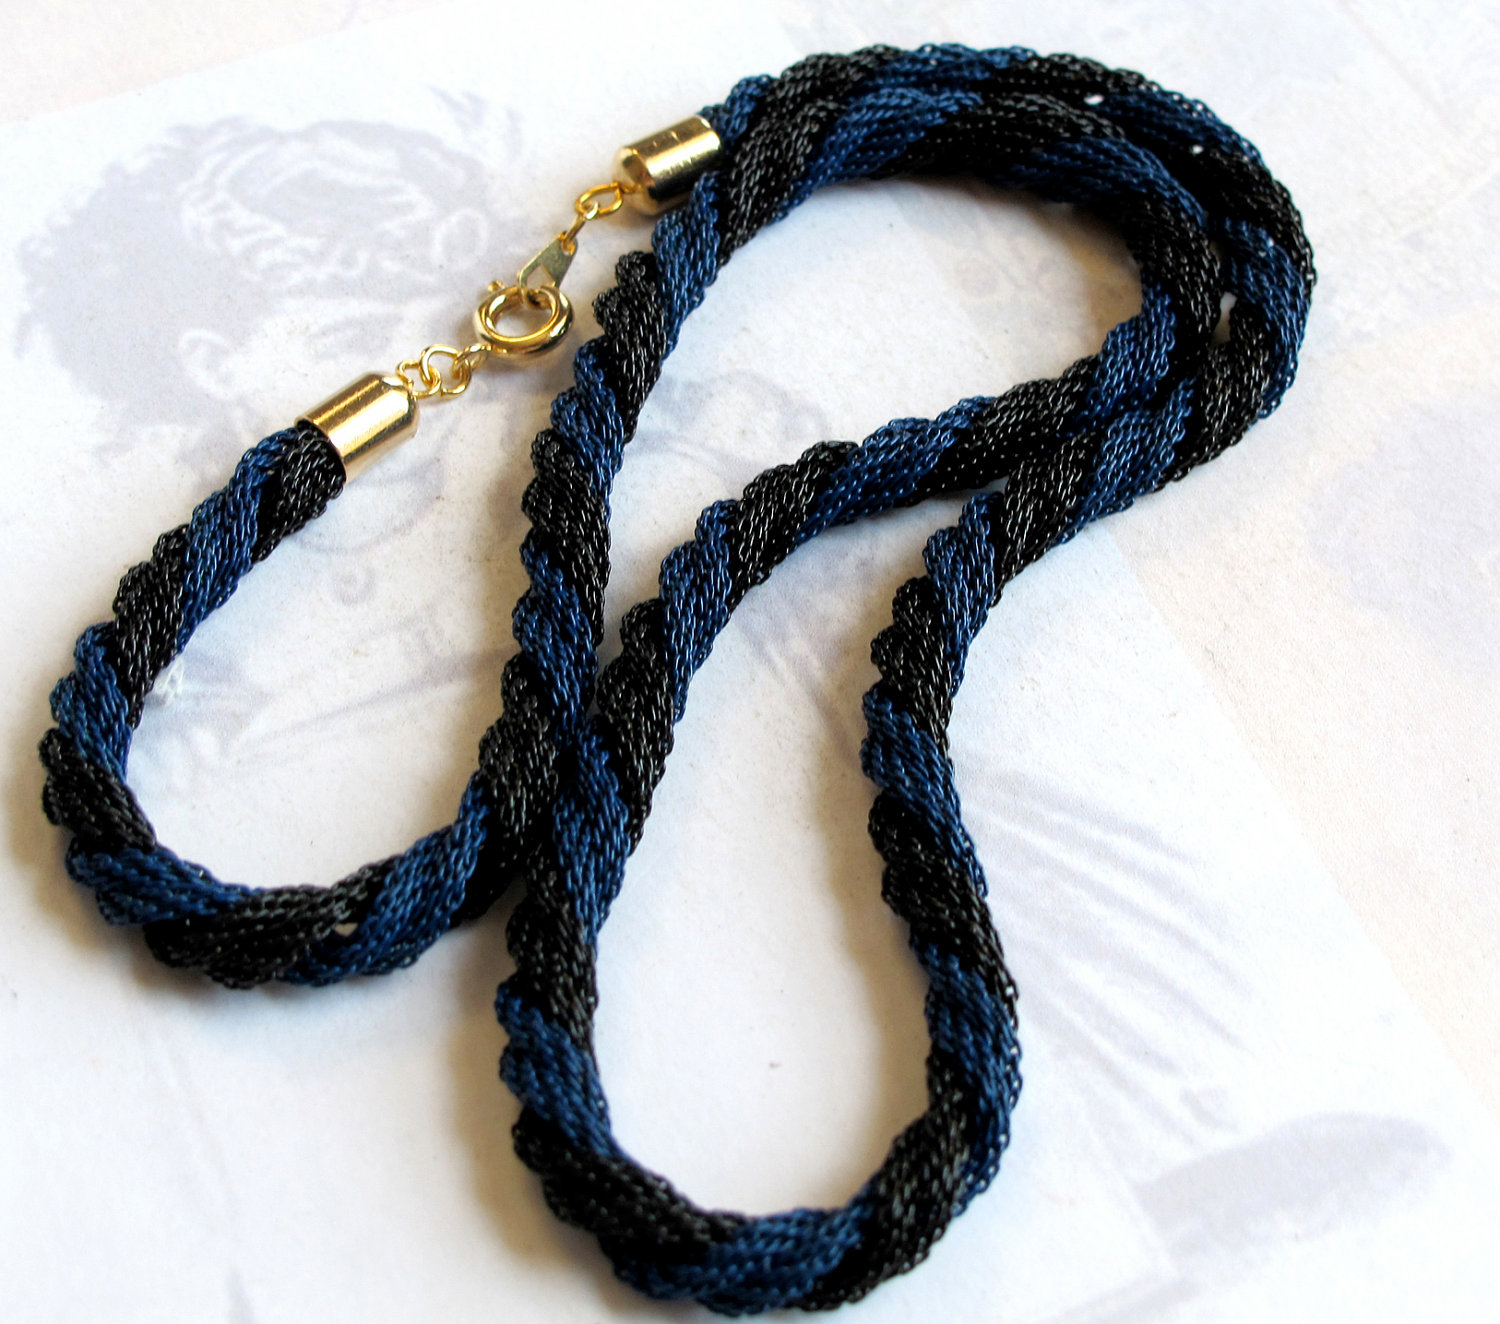 IOYYIO Flexible Waterproof Braided Leather Necklace Cord India | Ubuy